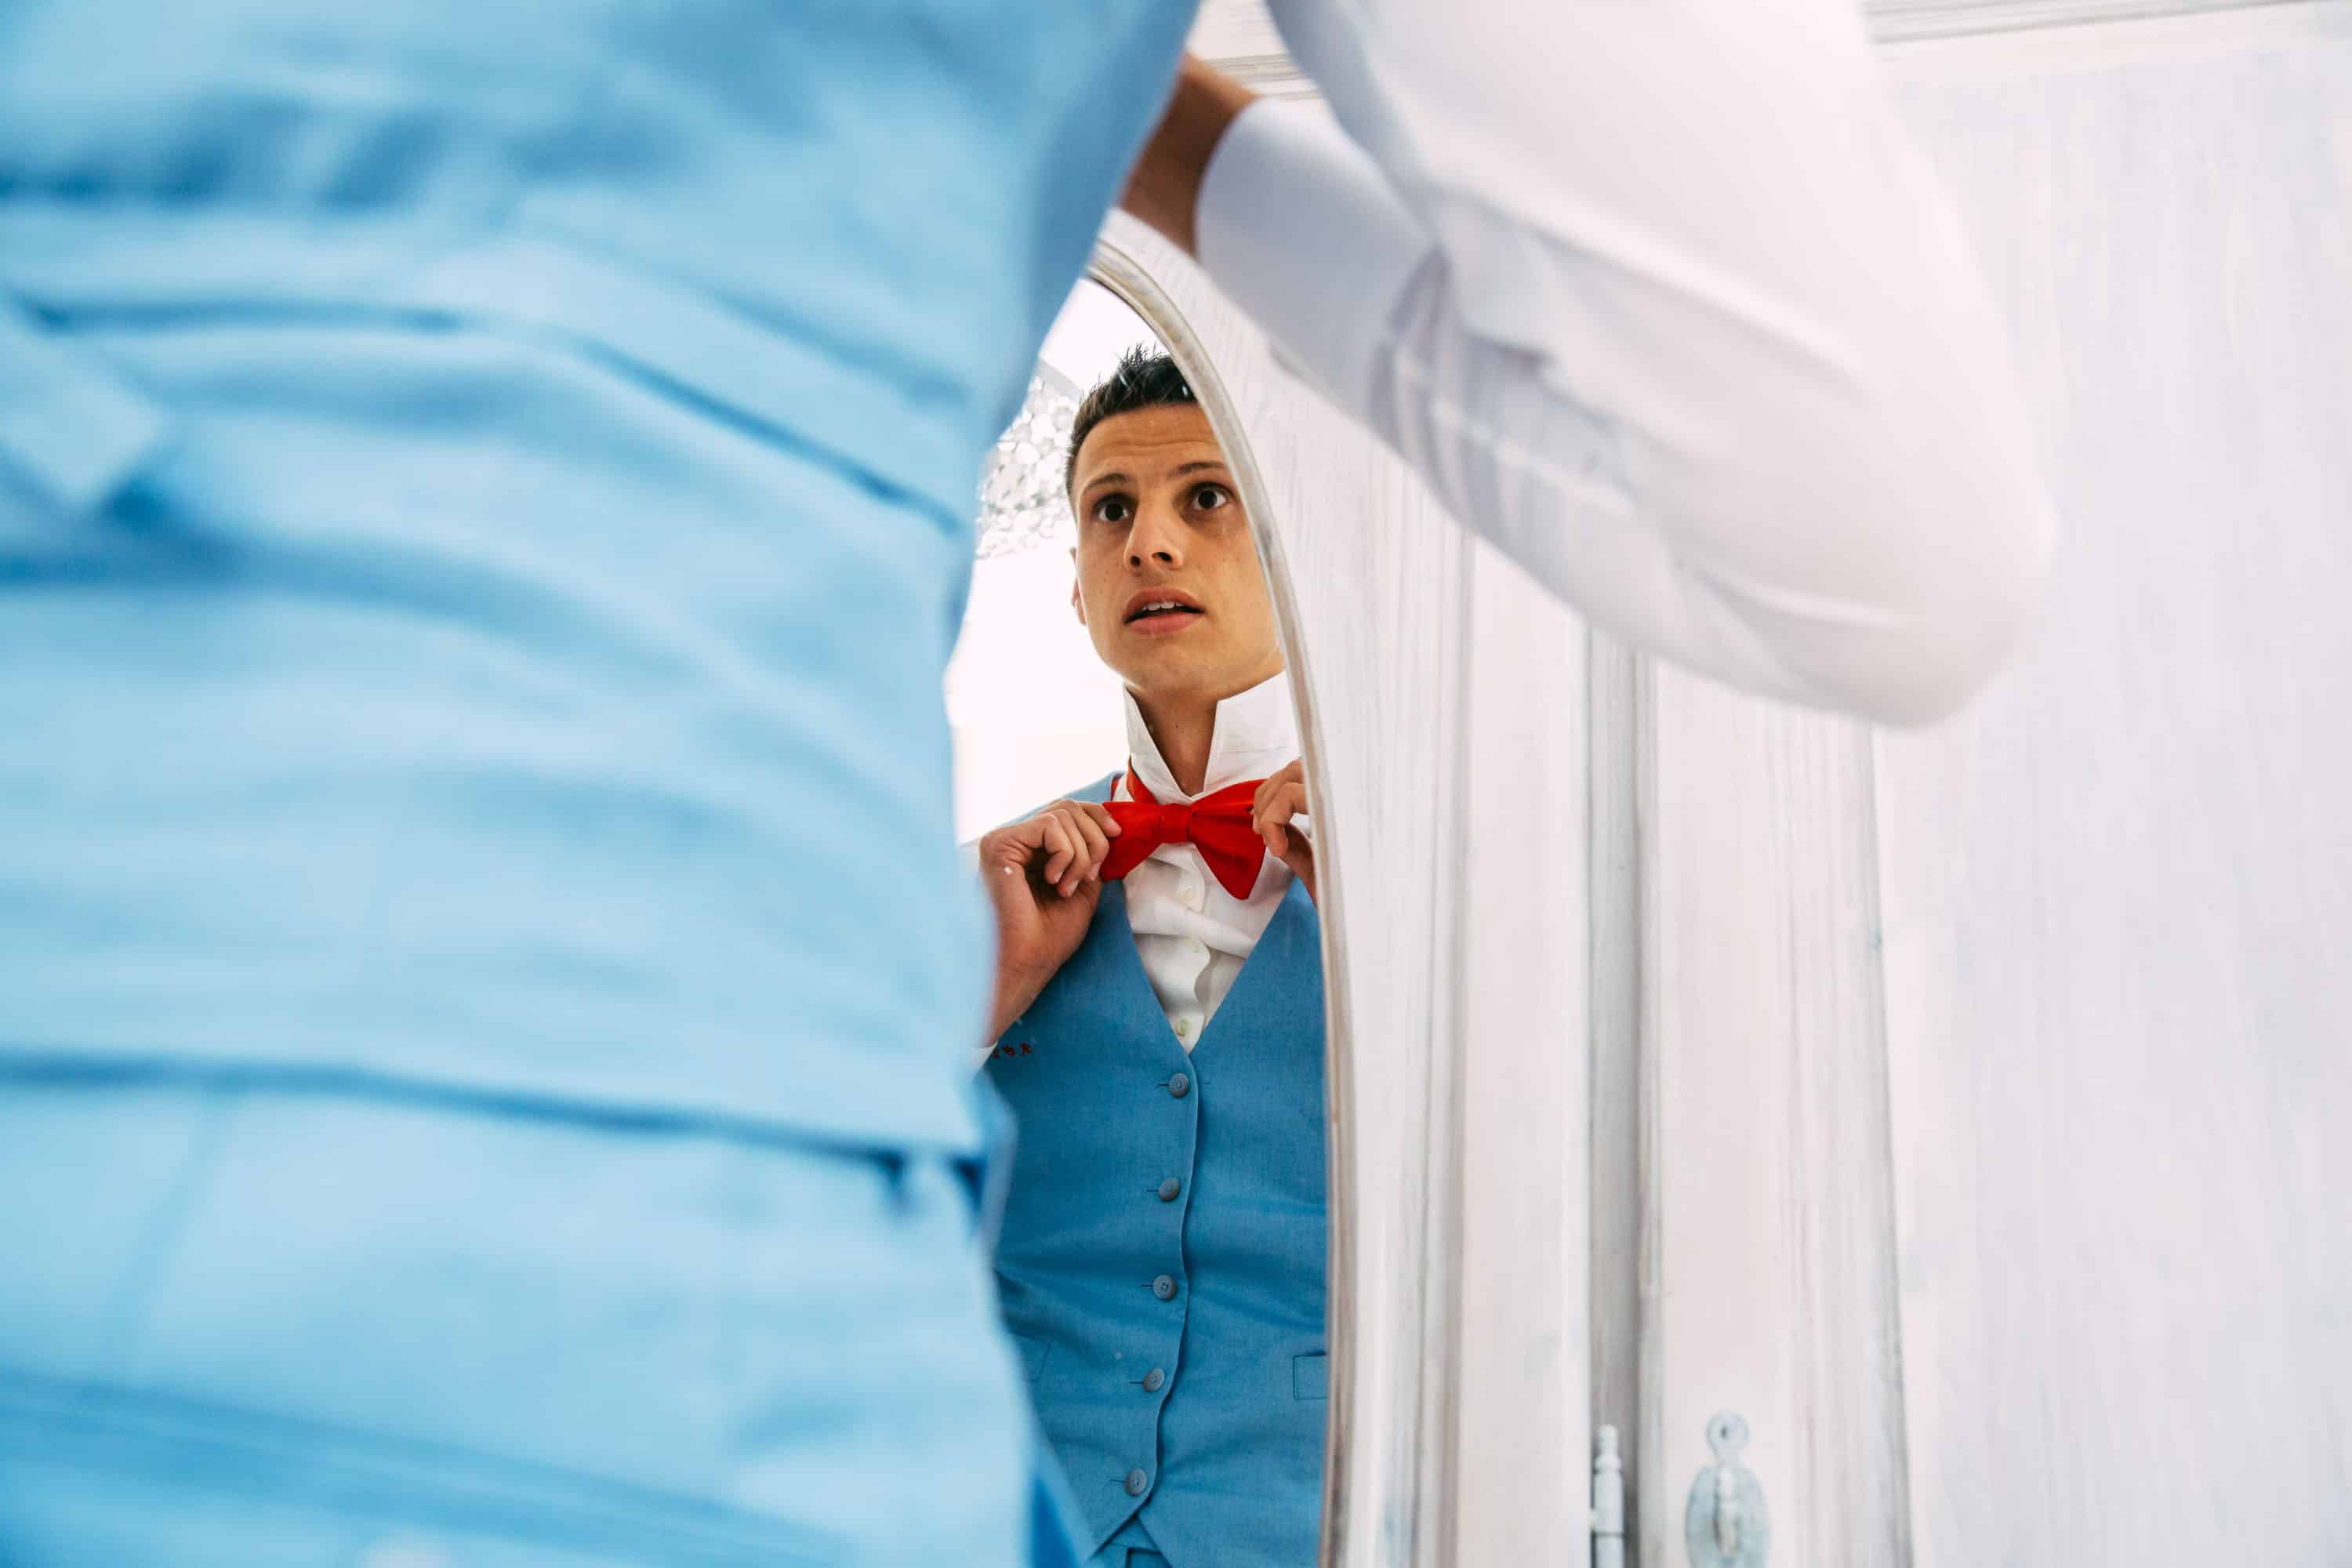 A man adjusts his tie in a mirror on his wedding day.